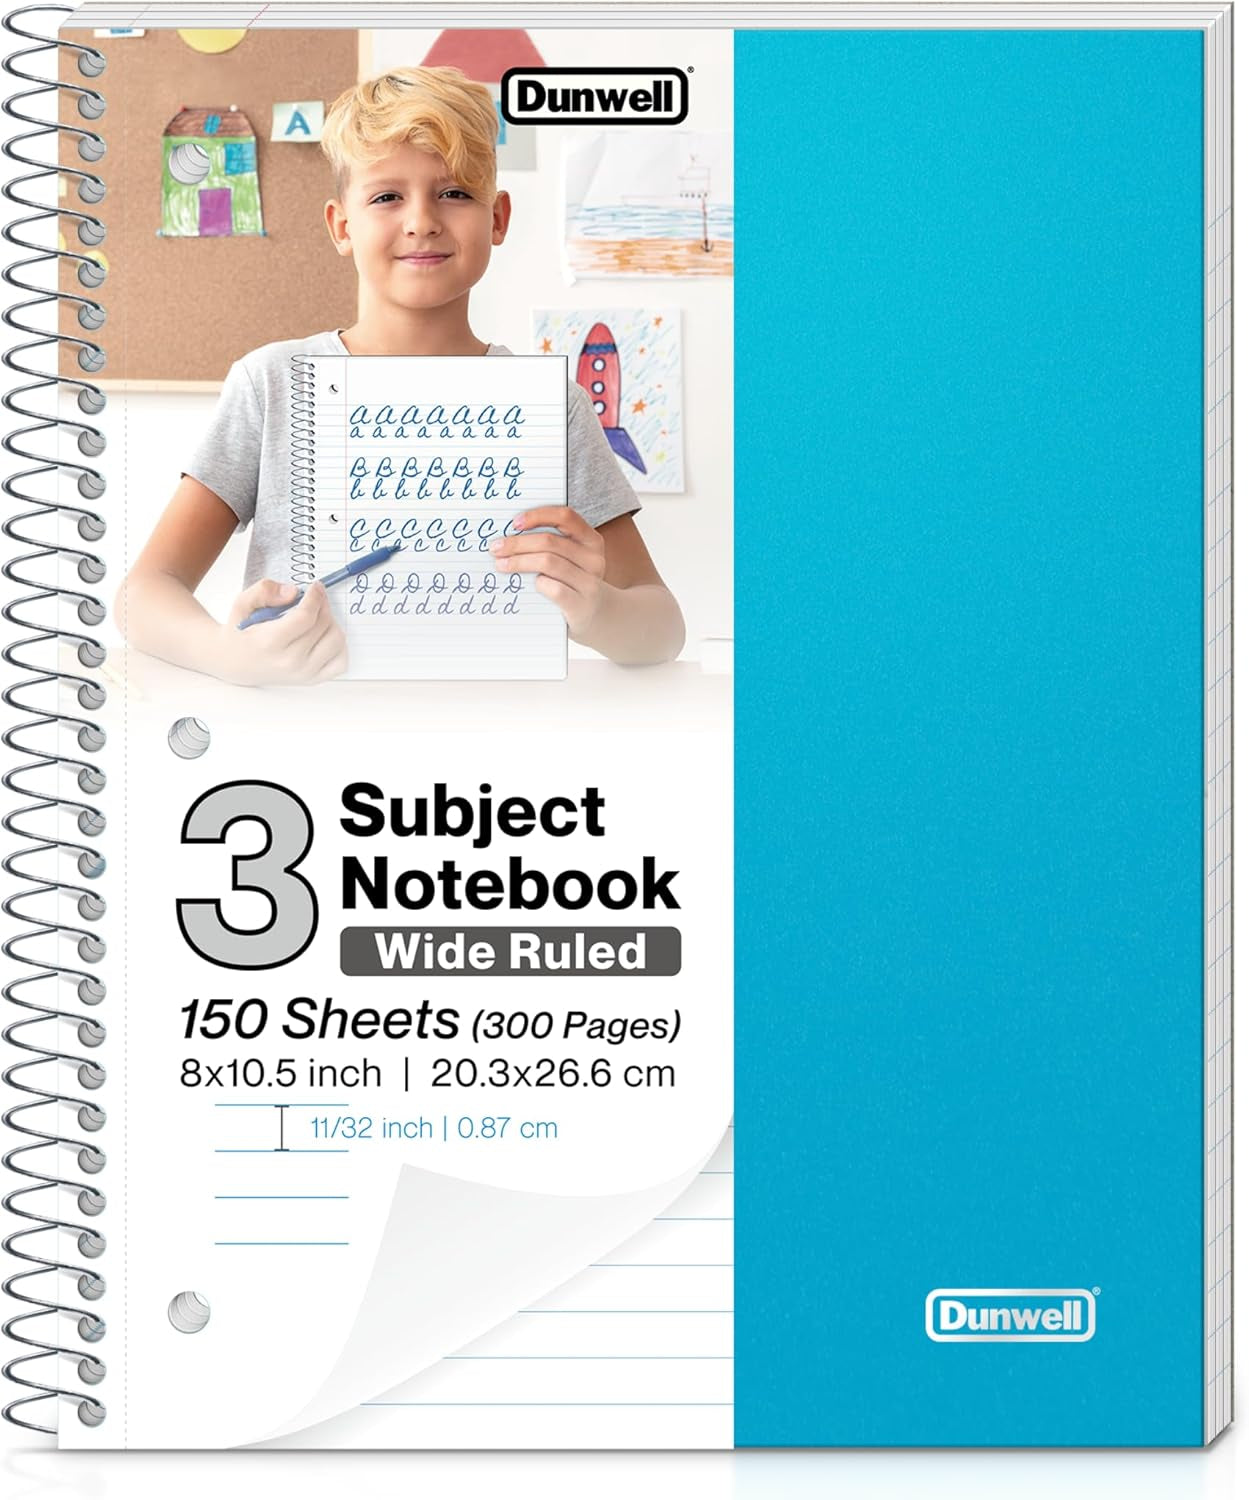 1-Subject Notebook, Wide Ruled Notebook, Blue Plastic Cover, 100 Sheets (200 Pages) 8X10.5 3-Hole Easy Tear-Off Pages, Single Subject Spiral Note Book for Kid, School Notebook